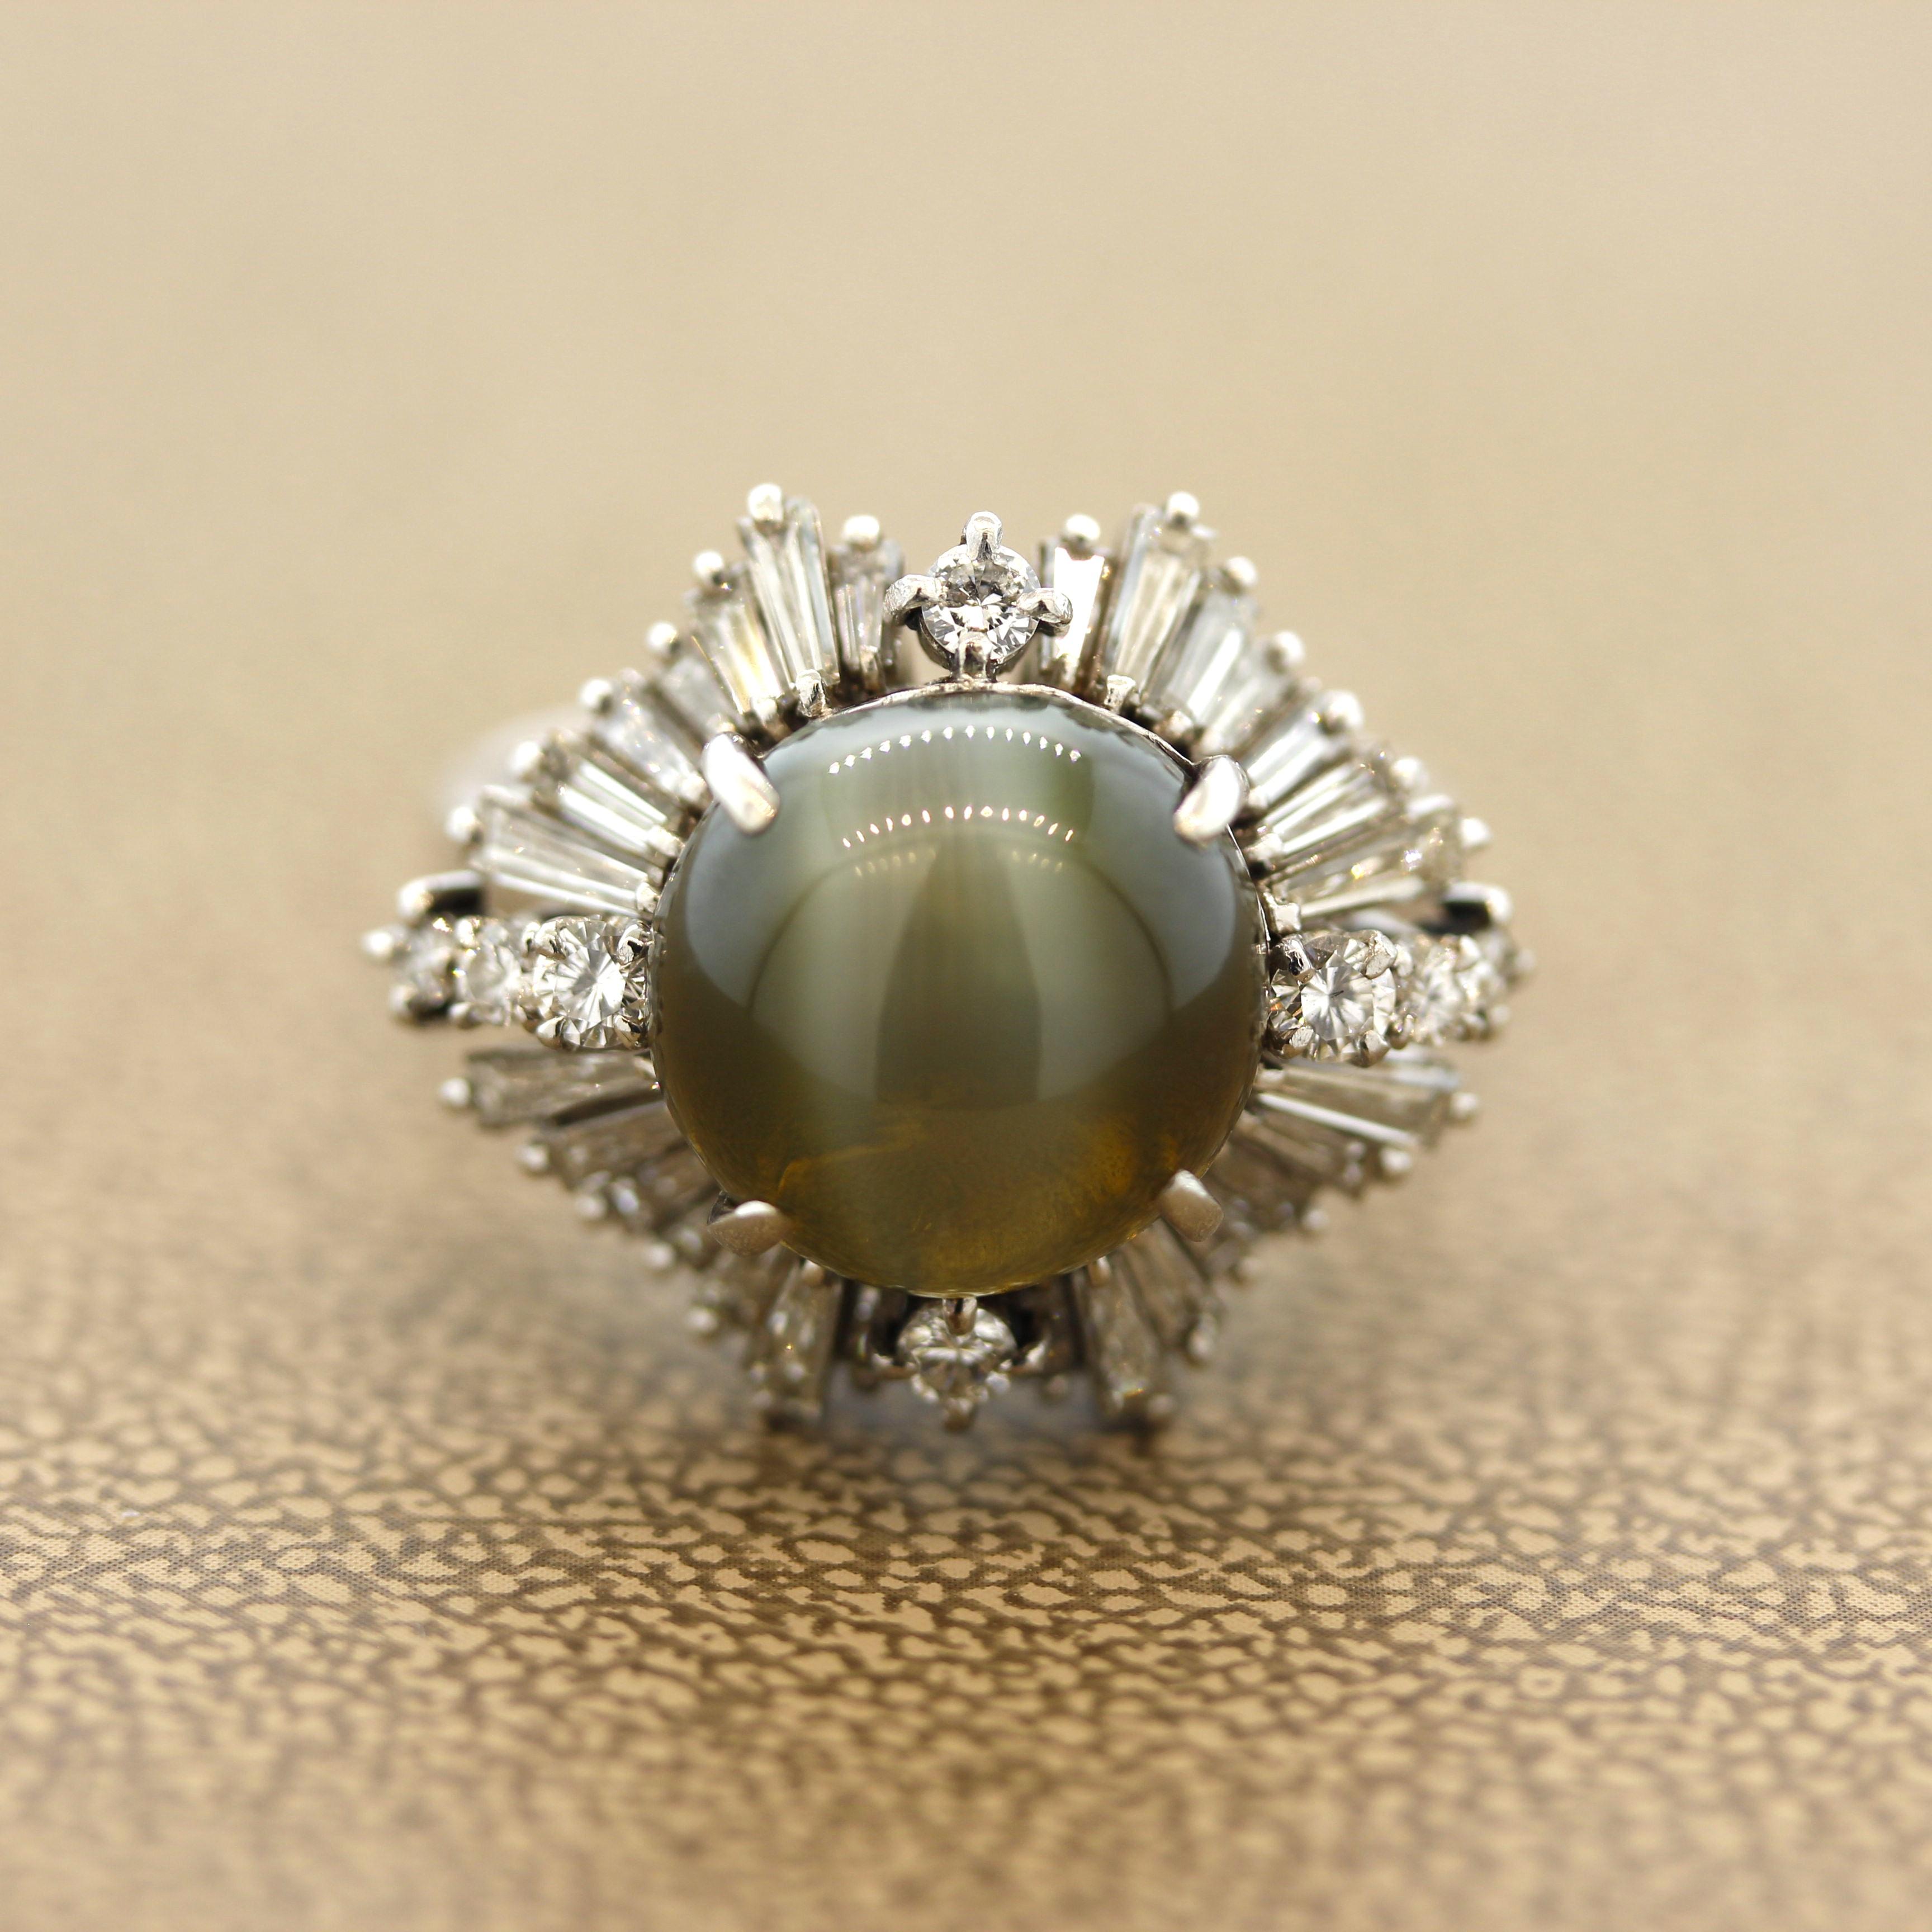 A fine platinum ring featuring a beautiful 7.02 carat cats eye chrysoberyl. It has a golden yellowish-green color with a strong sharp eye in its center which runs along both ends of the stone. It is complemented by a bright “sunburst” or diamonds,